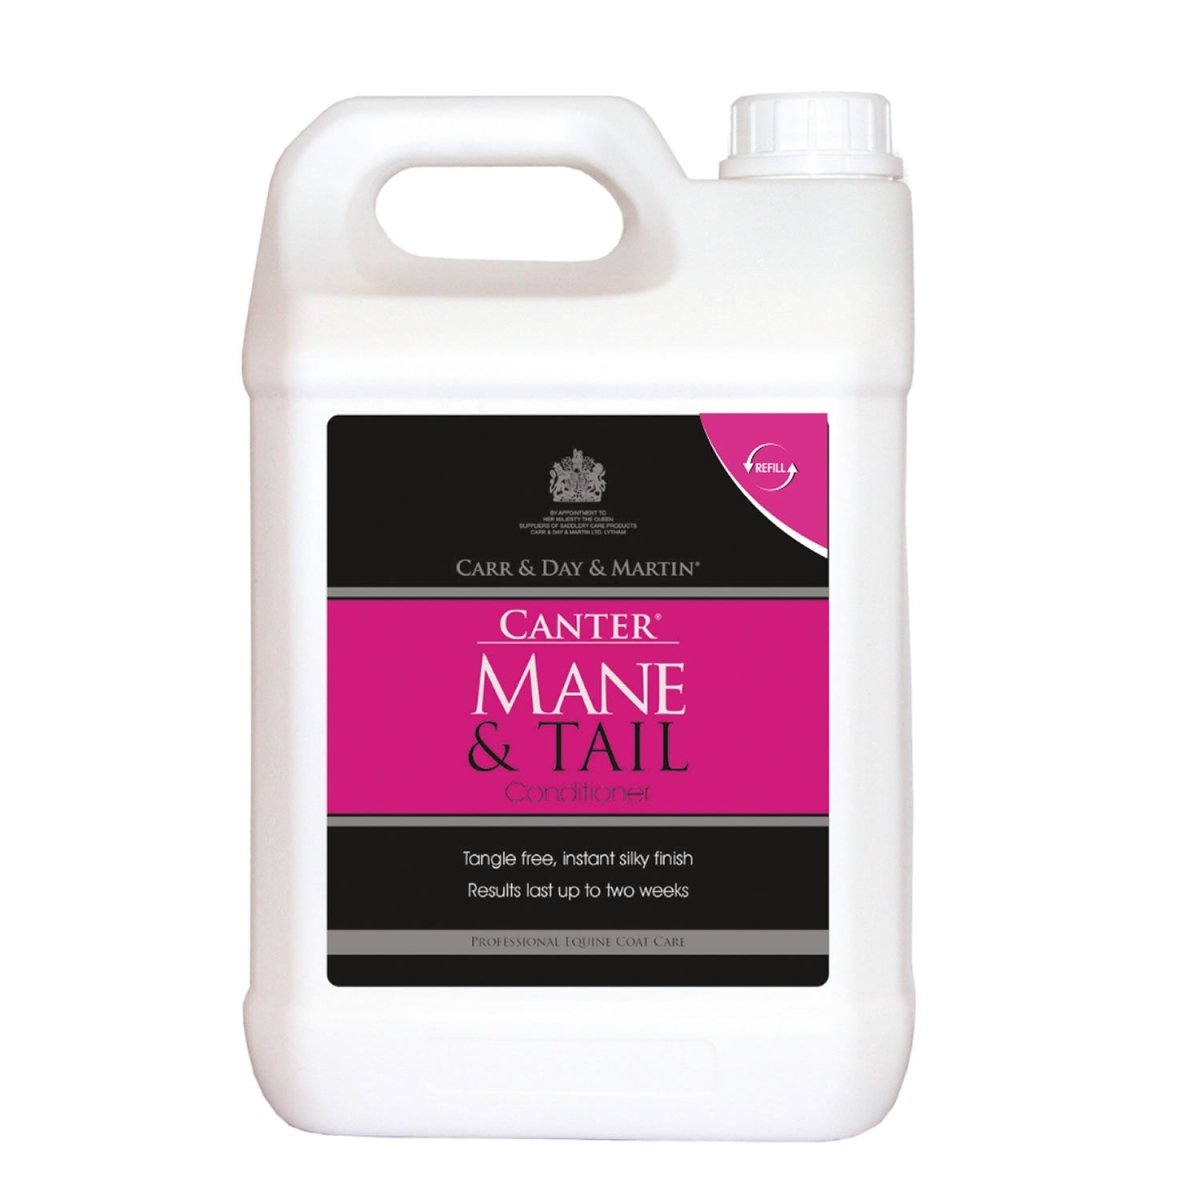 Carr & Day & Martin Canter Mane & Tail Conditioner Refill - 2.5Lt -